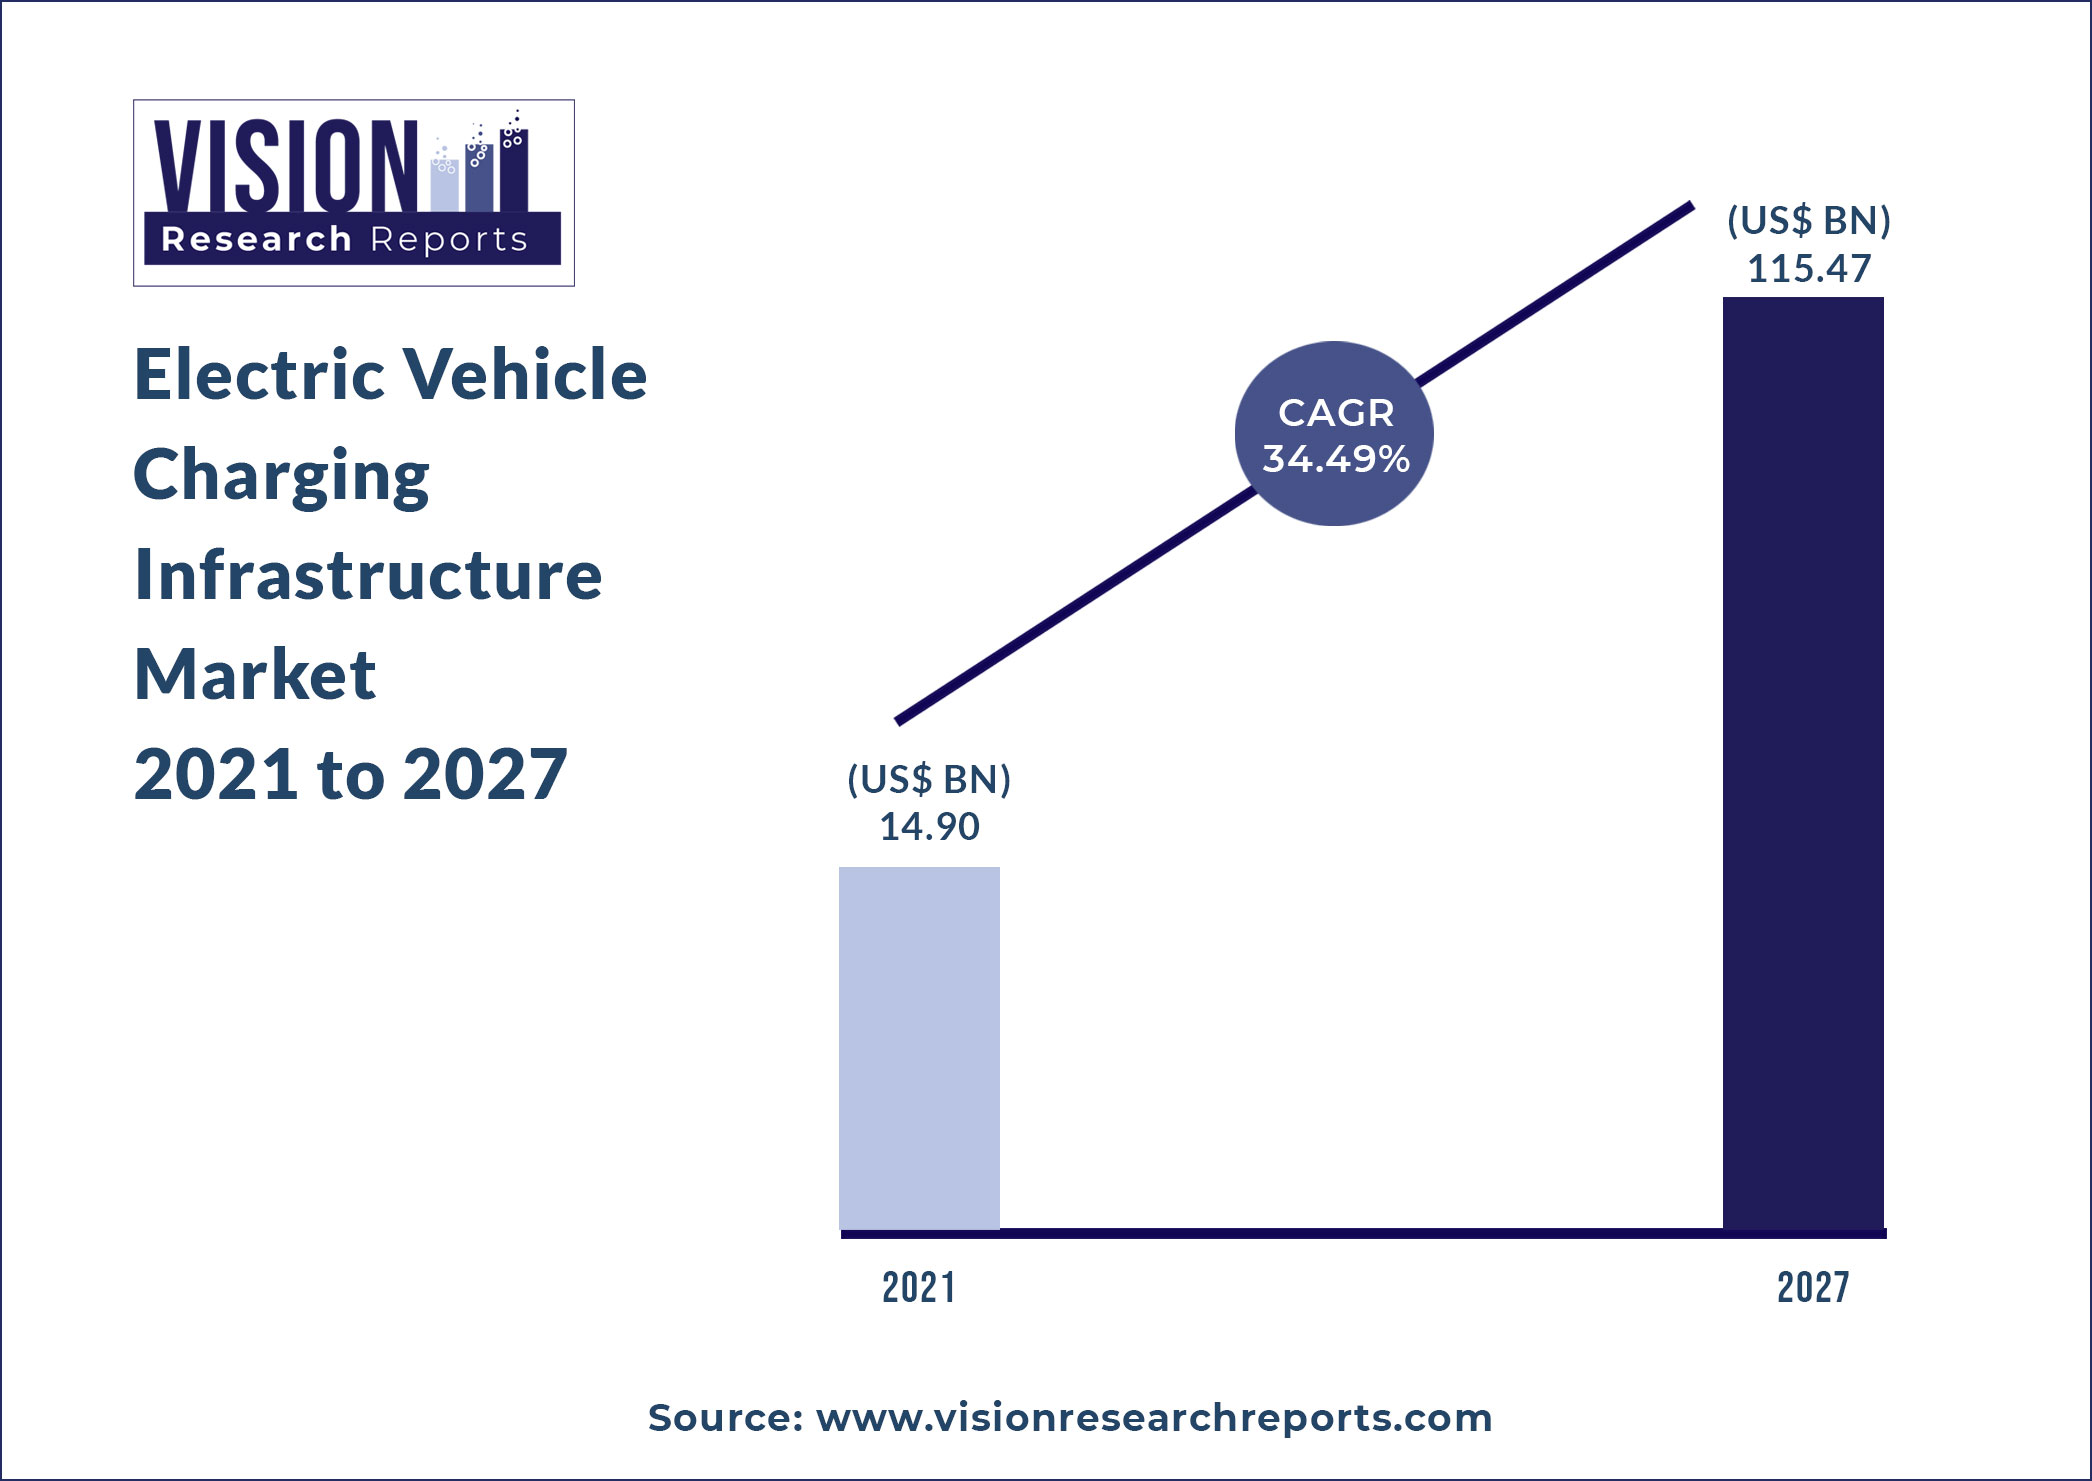 Electric Vehicle Charging Infrastructure Market Size 2021 to 2027